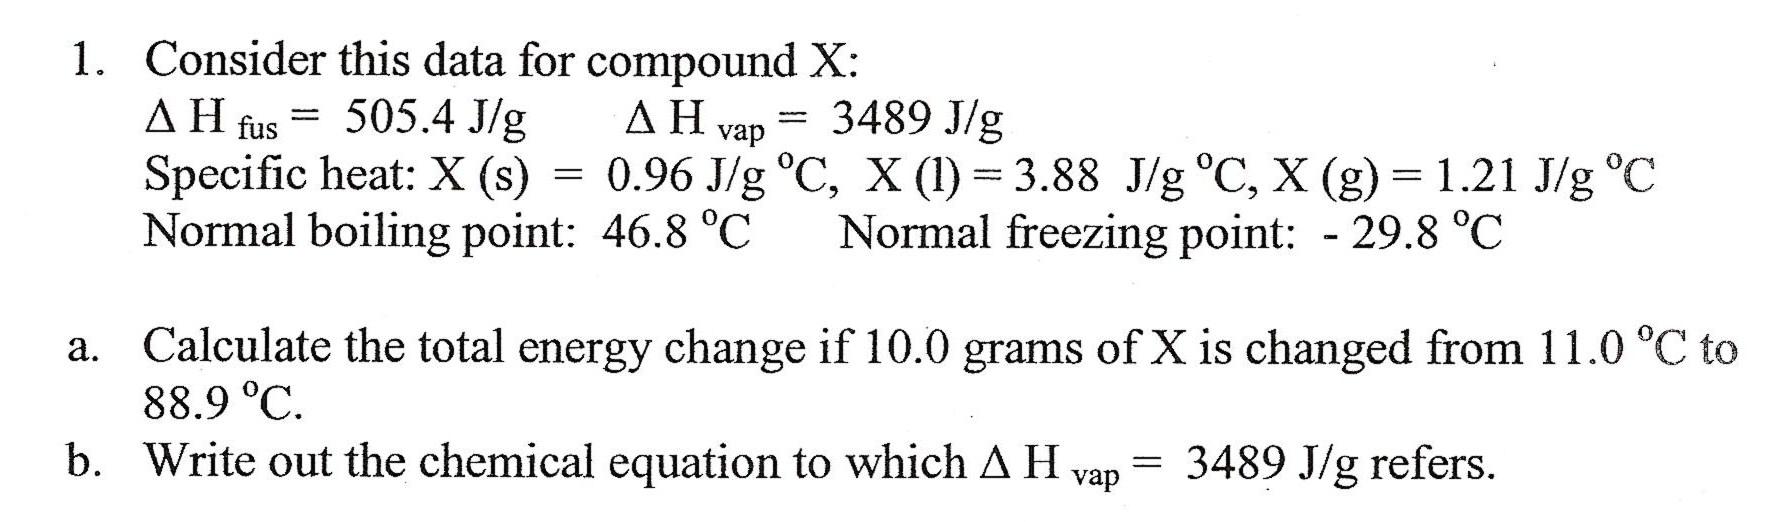 Enthalpy Heat Of Formation And Heat Of Vaporization